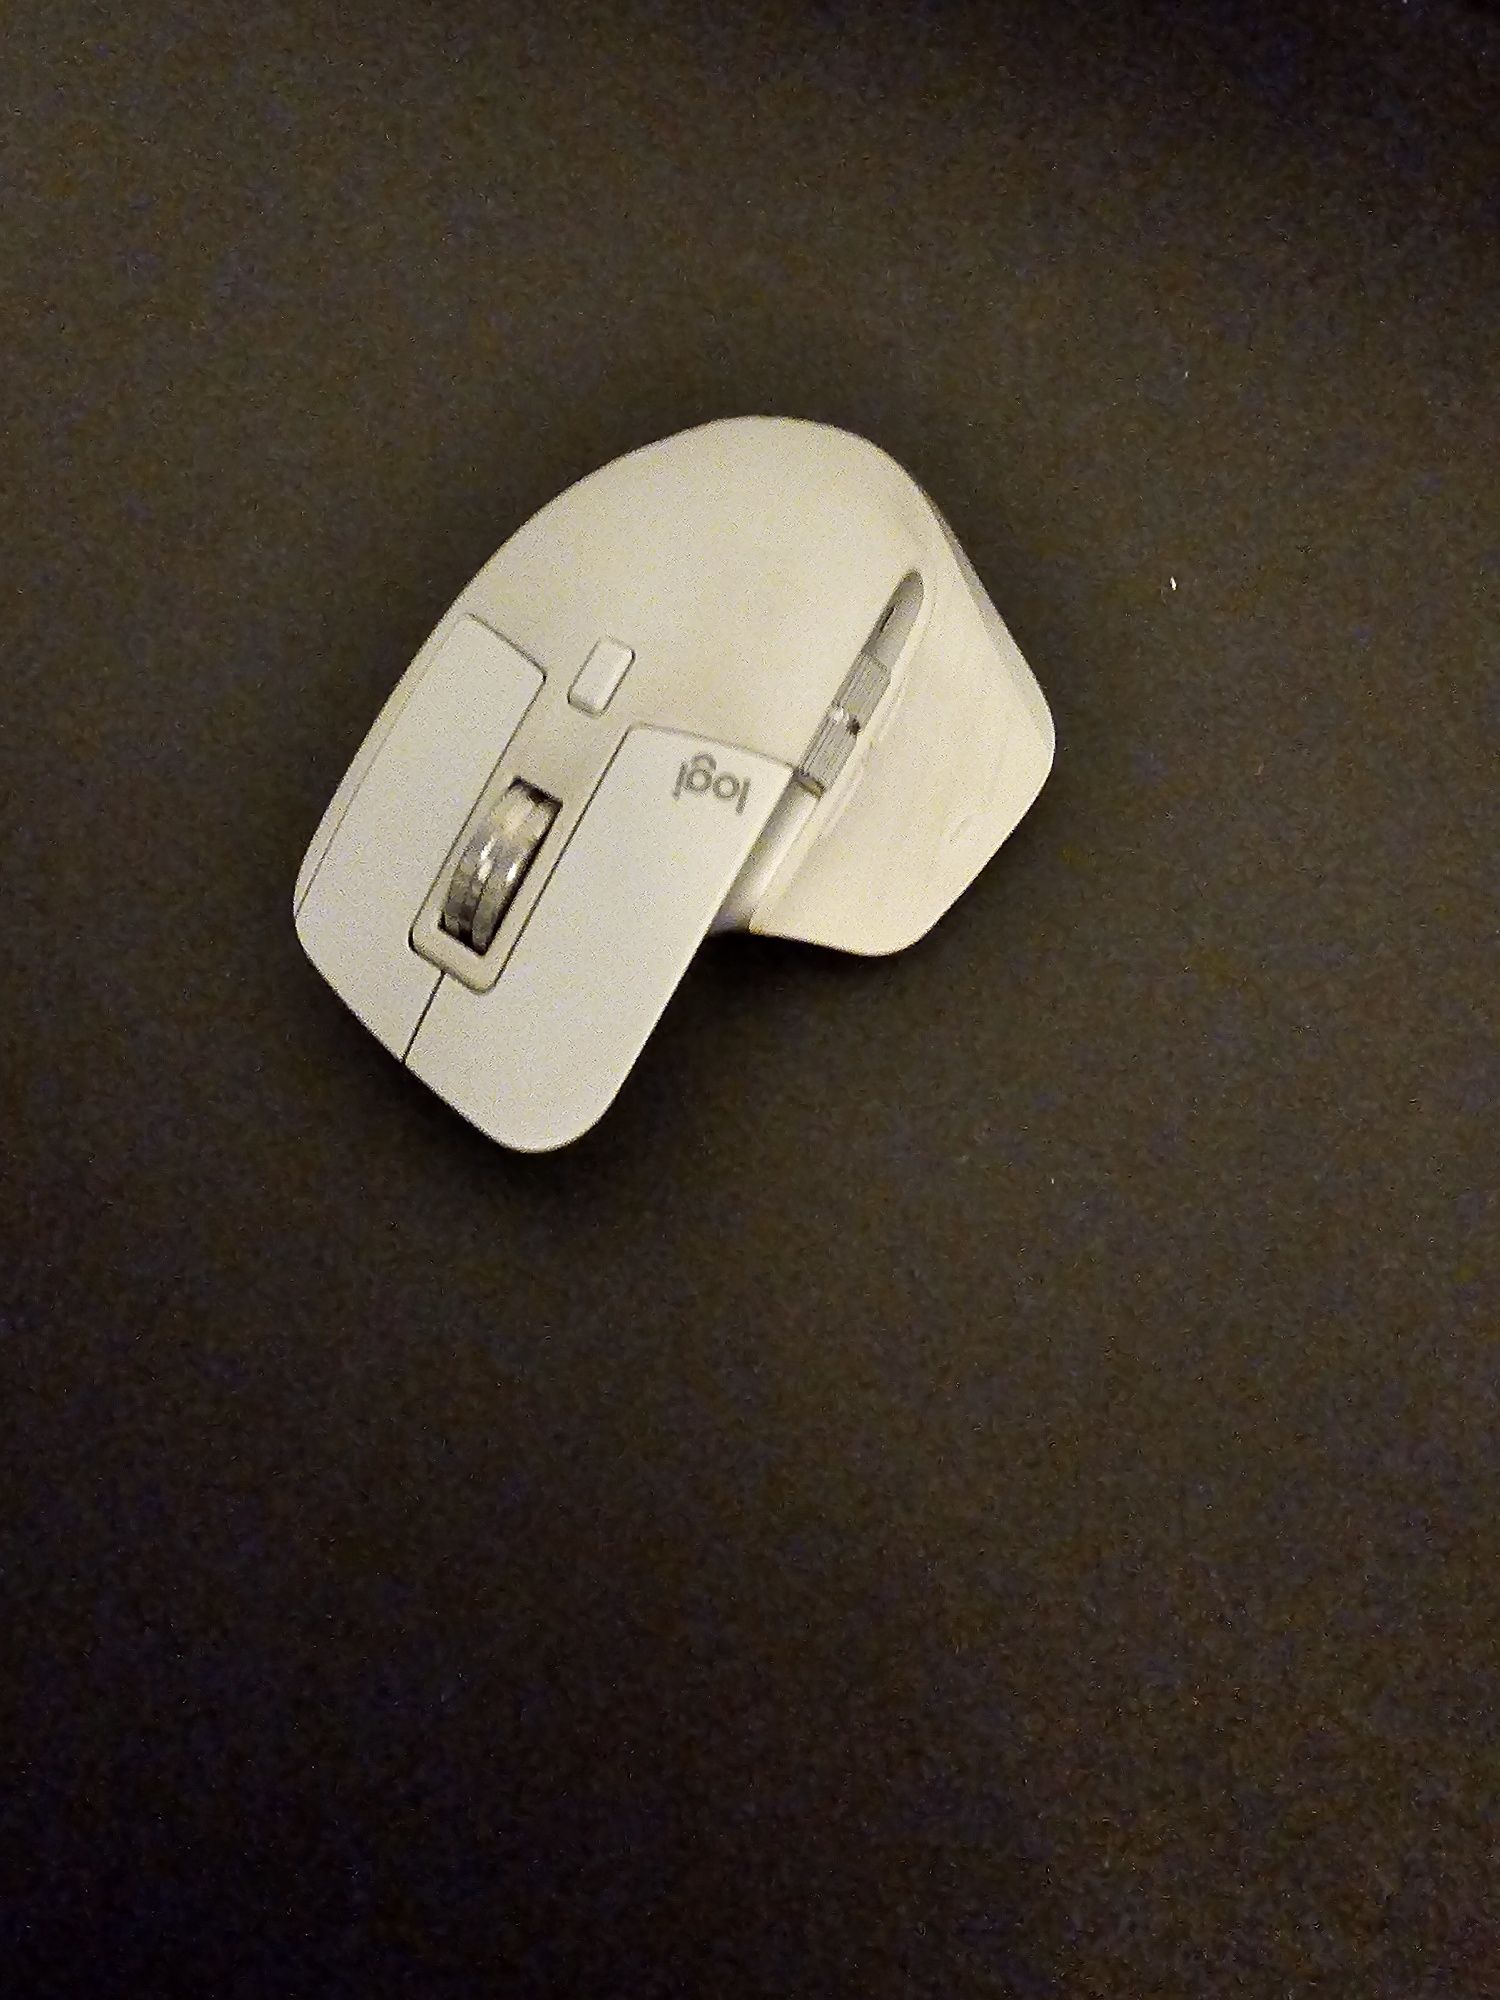 Mouse MX Master 3s + Tastatura Mecanica Qwertykey